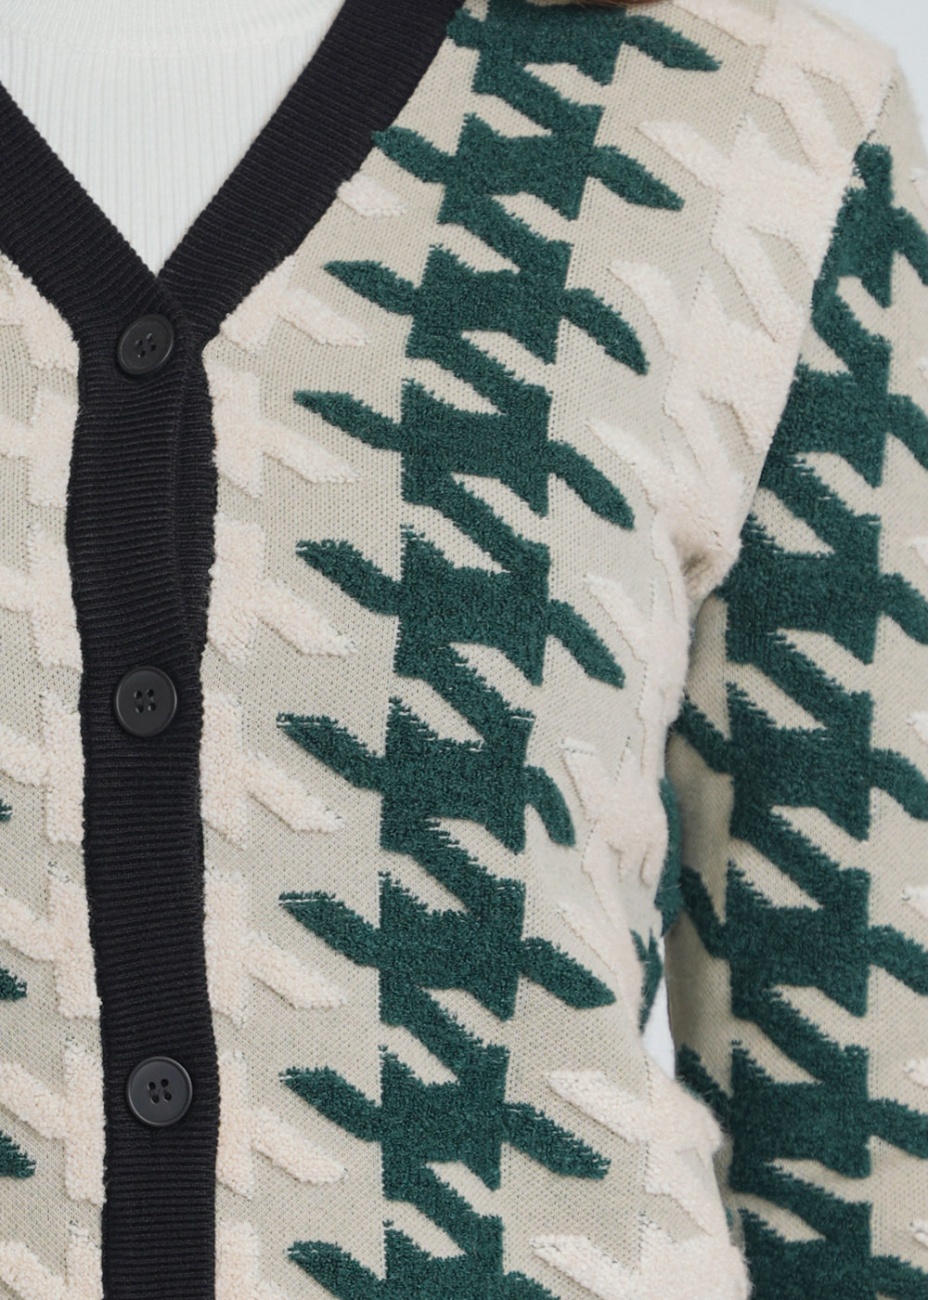 Green & White Cardigan with Classic Print